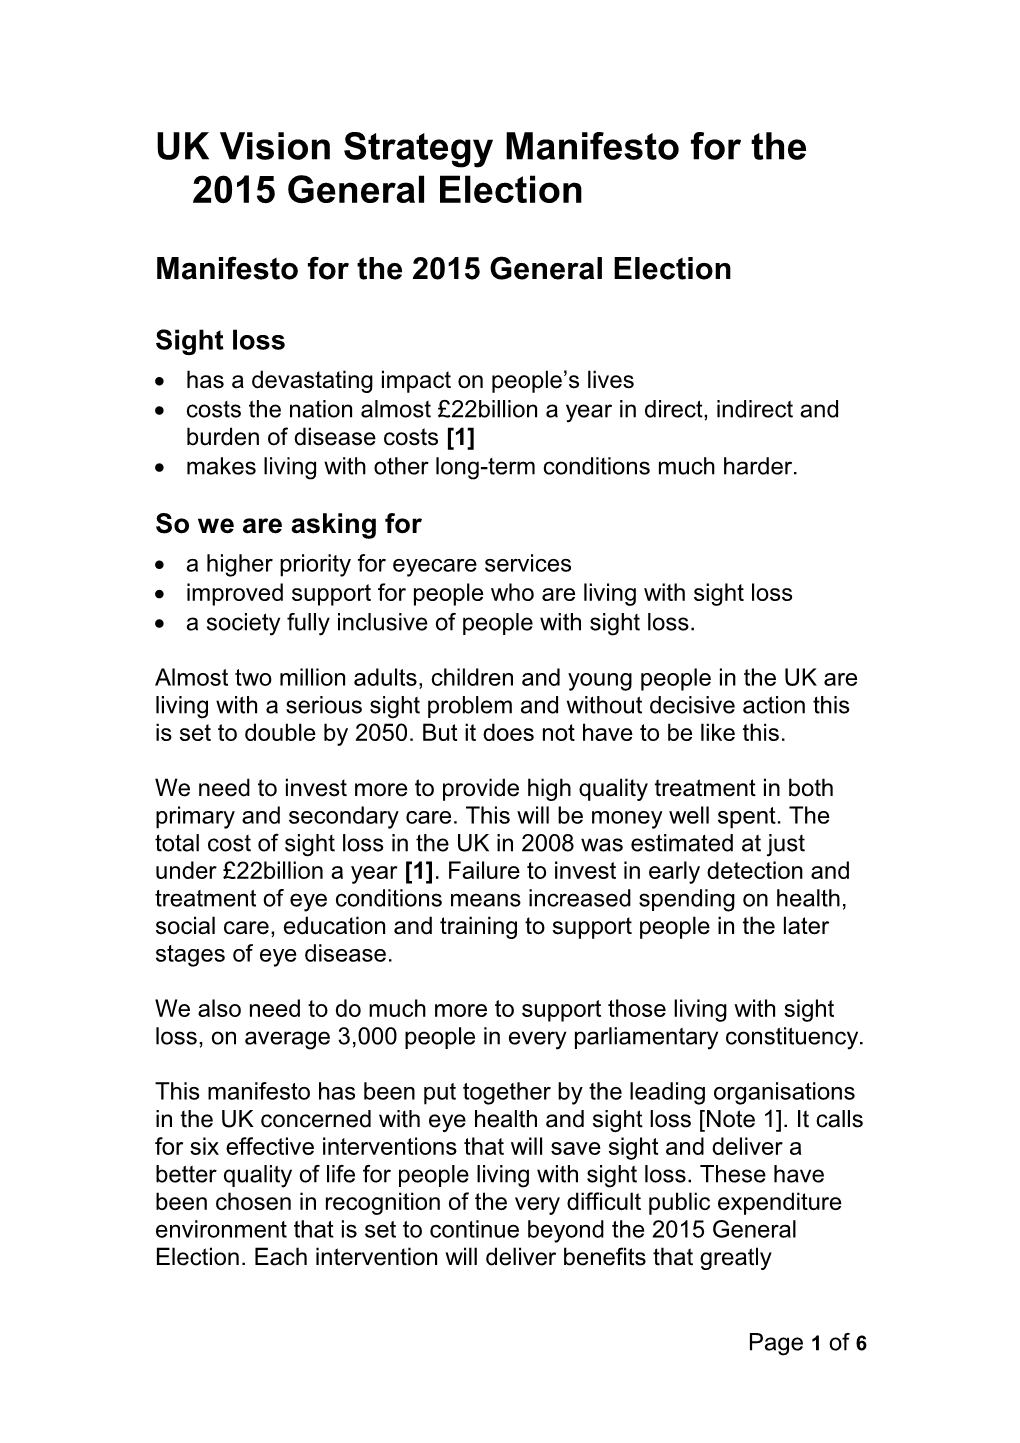 UK Vision Strategy Manifesto for the 2015 General Election